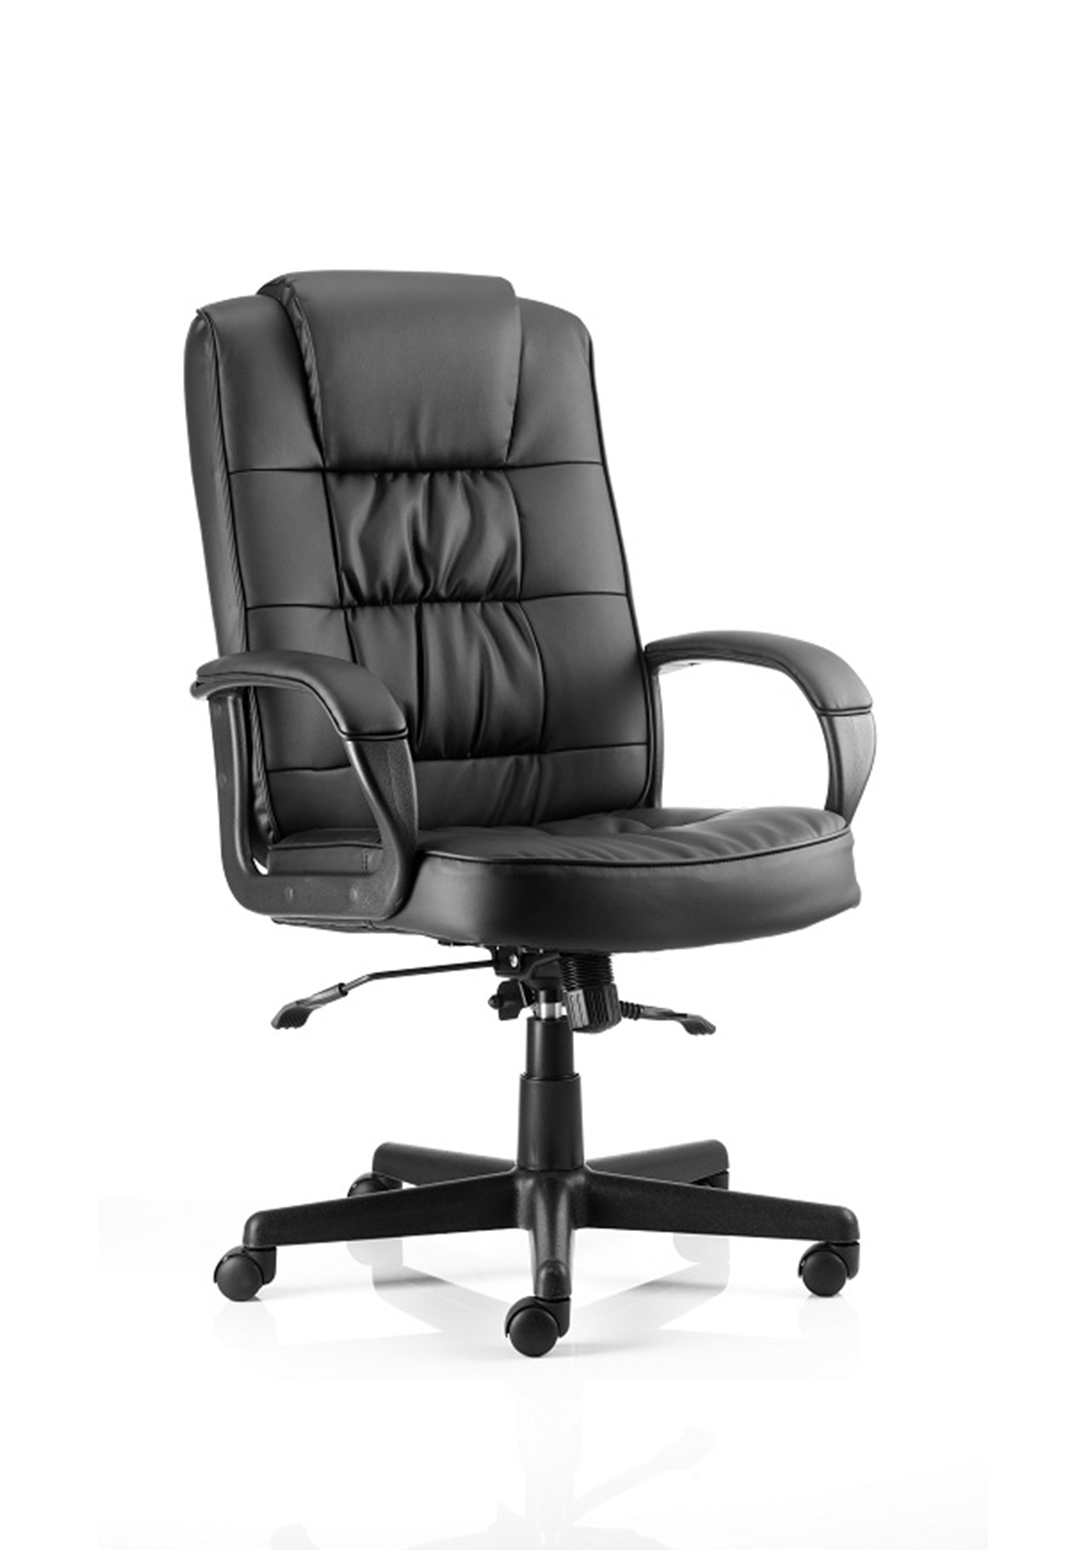 Moore Executive Chair Black Fabric With Arms